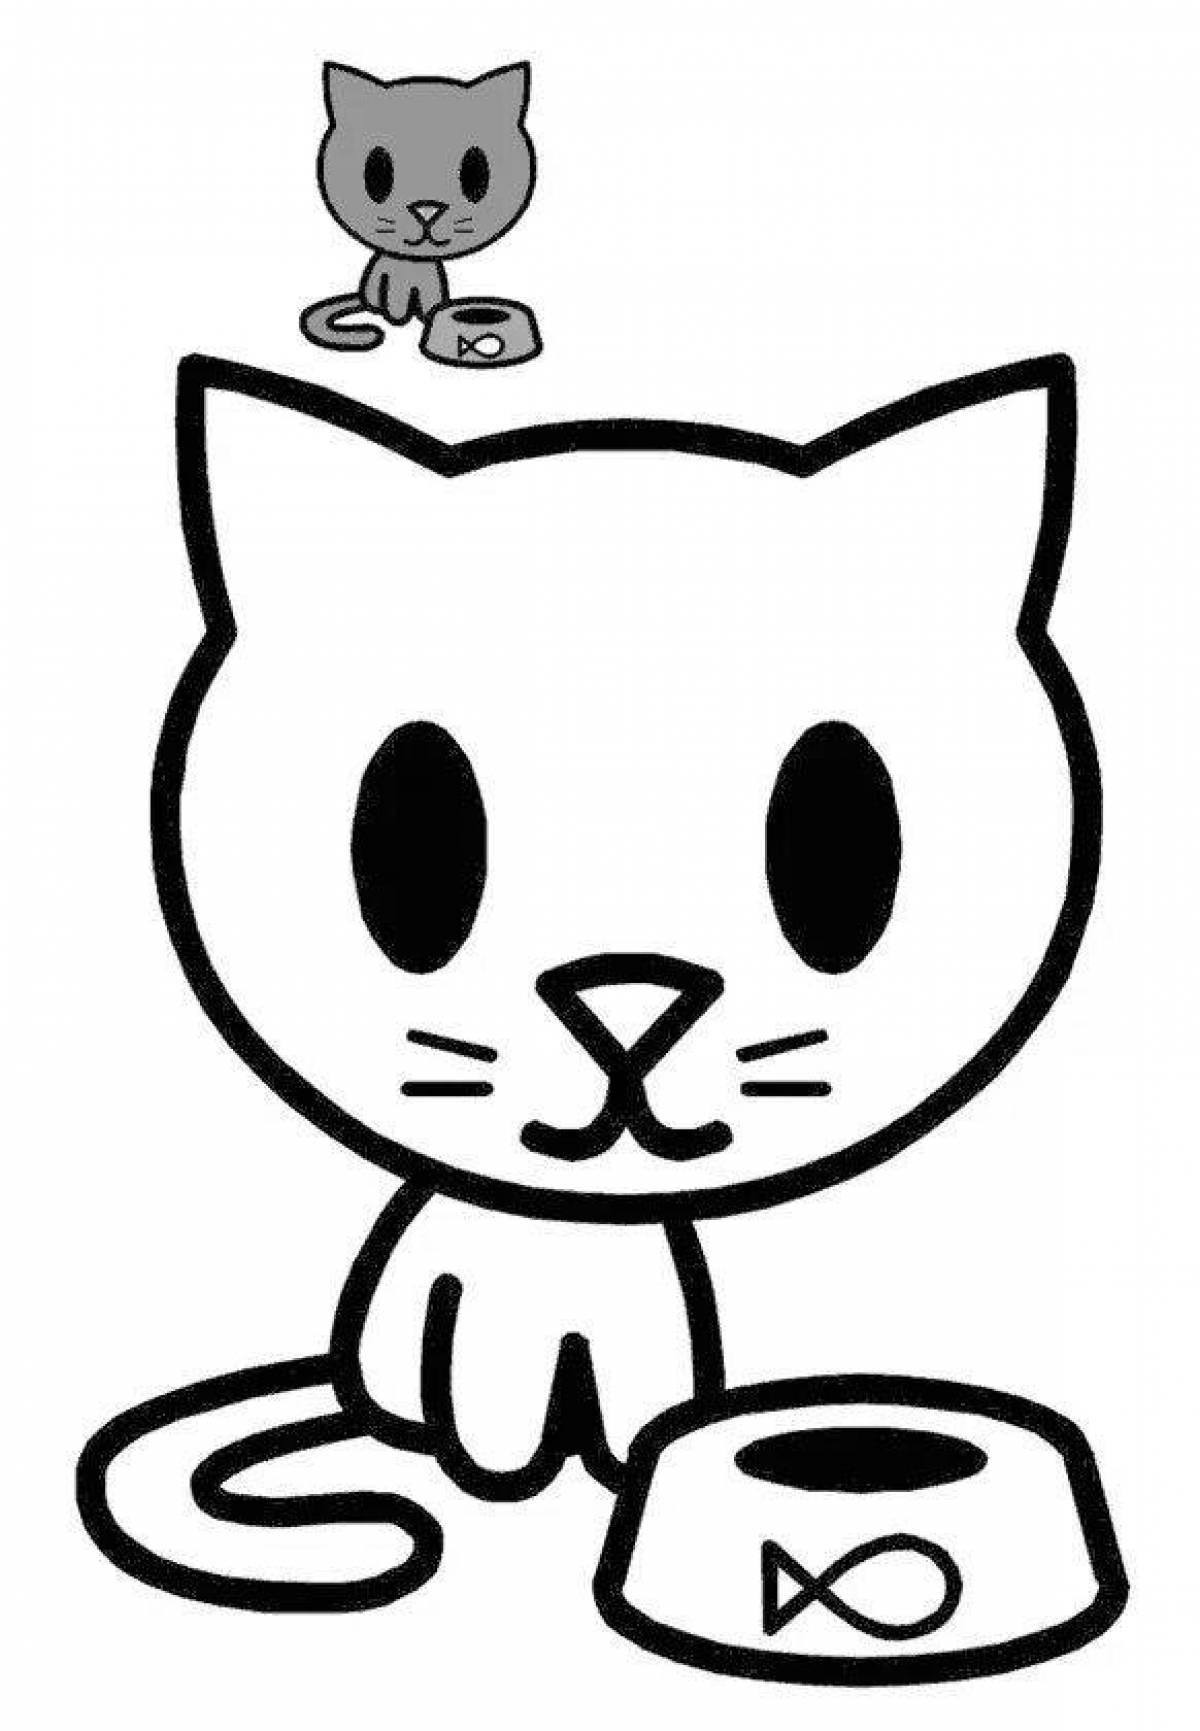 Crazy little kittens coloring book